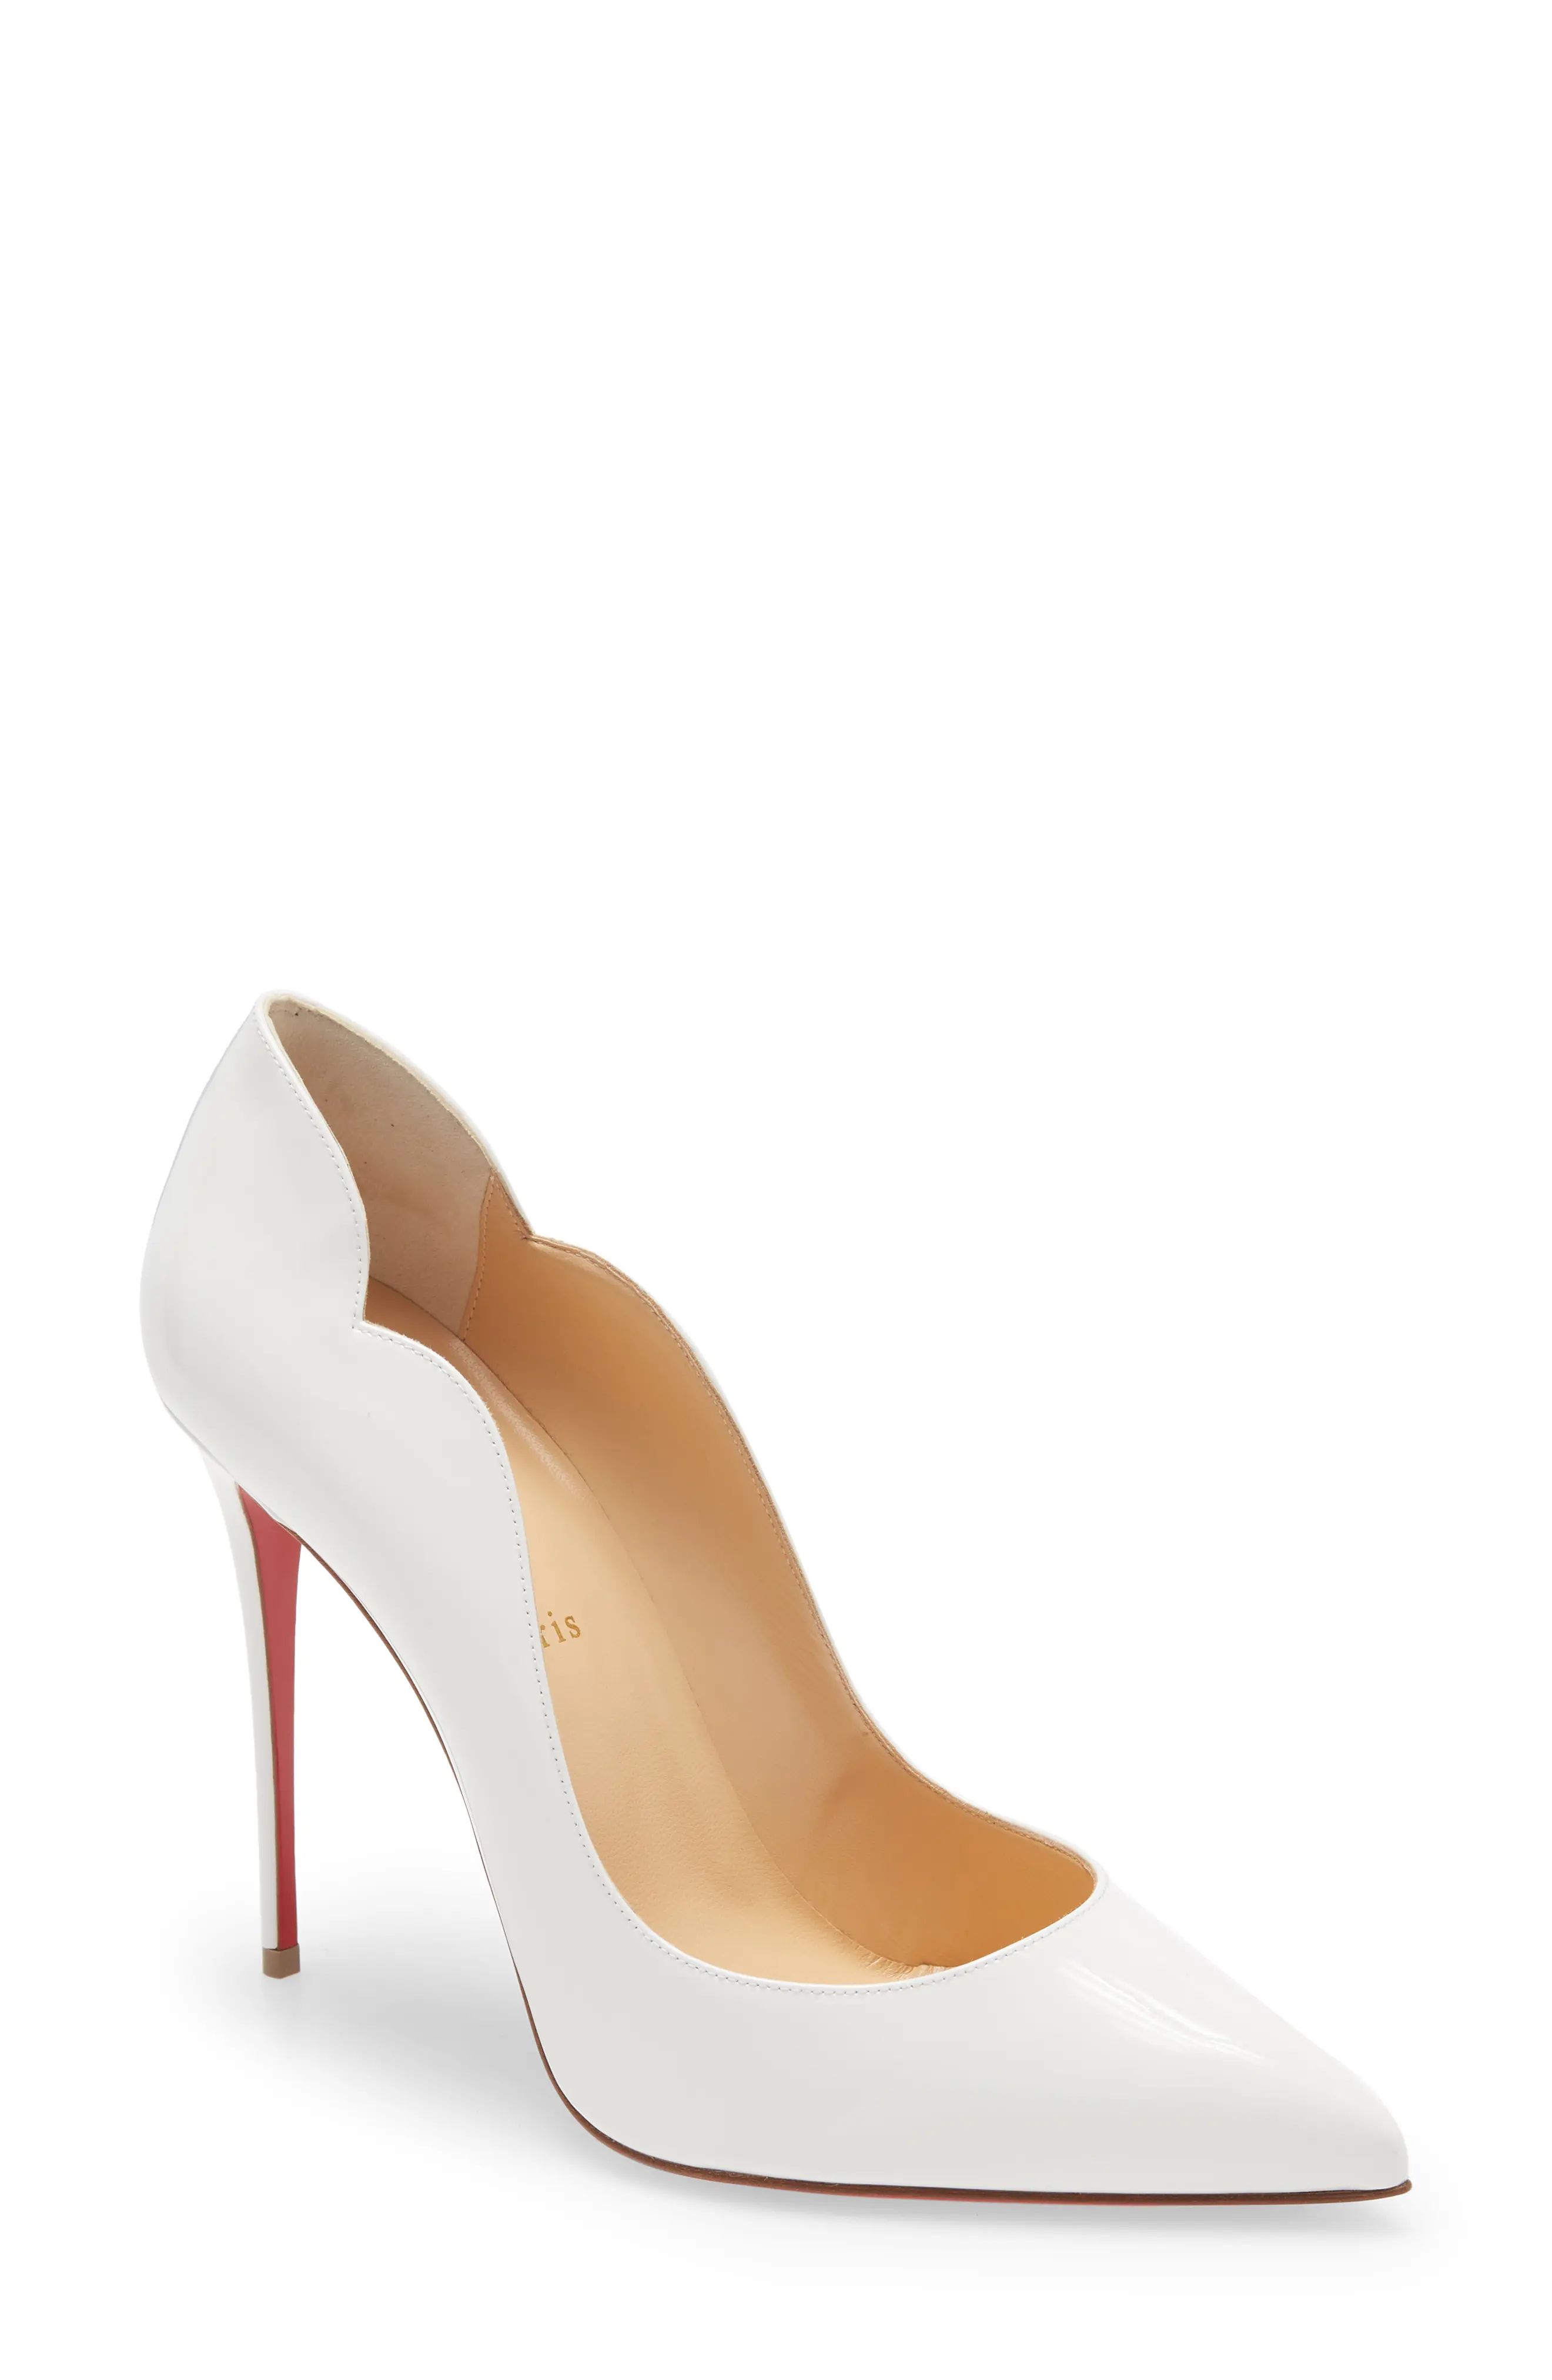 Christian Louboutin Hot Chick Scallop Pointed Toe Pump in White at Nordstrom, Size 12Us | Nordstrom